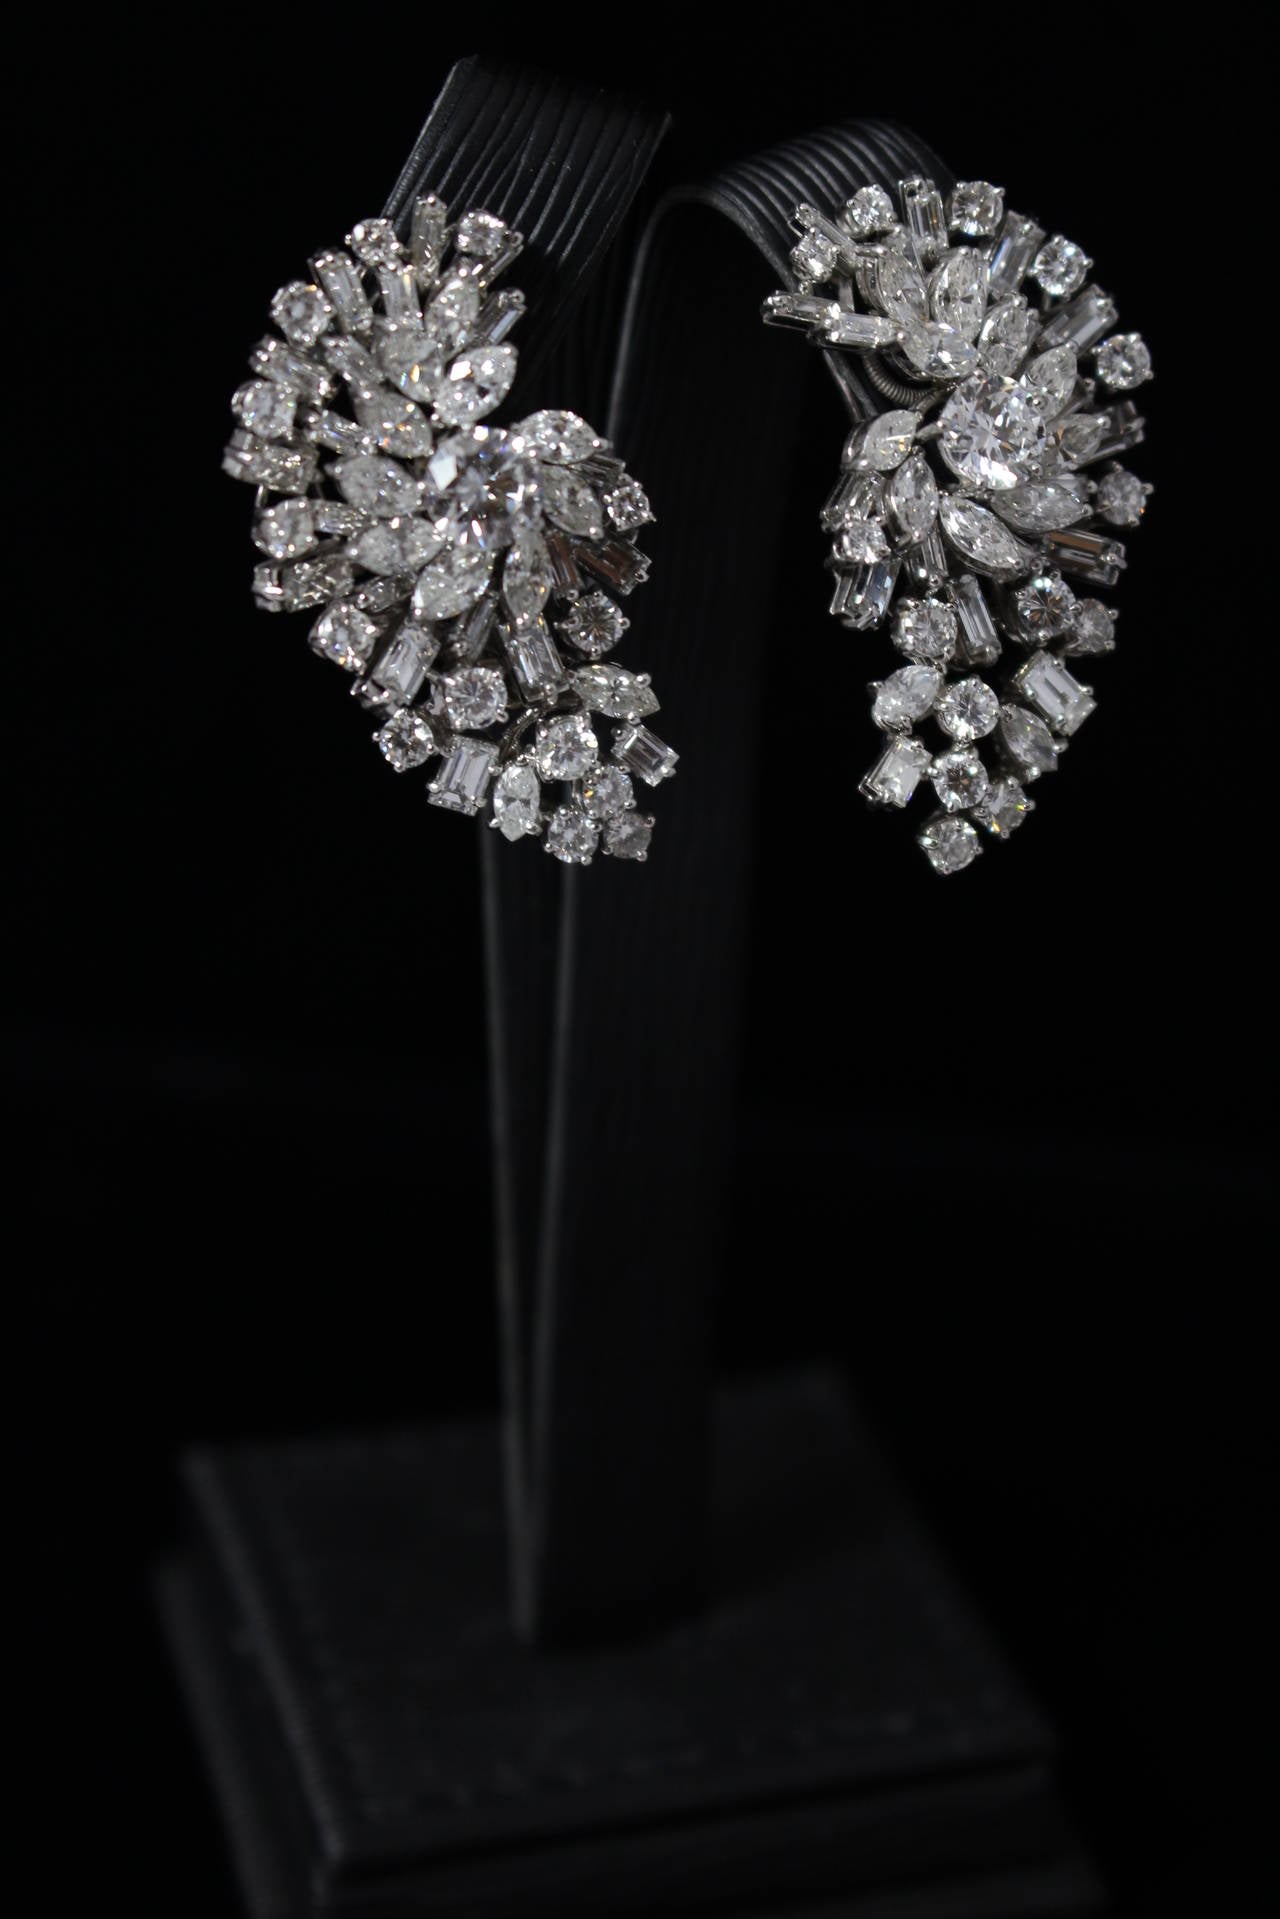 These are a gorgeous pair of platinum and diamond earrings. The earrings display 94 diamonds with an approximate total weight of 14 carats. There are approximately 40 Square, 24 Pear, and 30 Round cuts. These earrings feature a clip closure (which